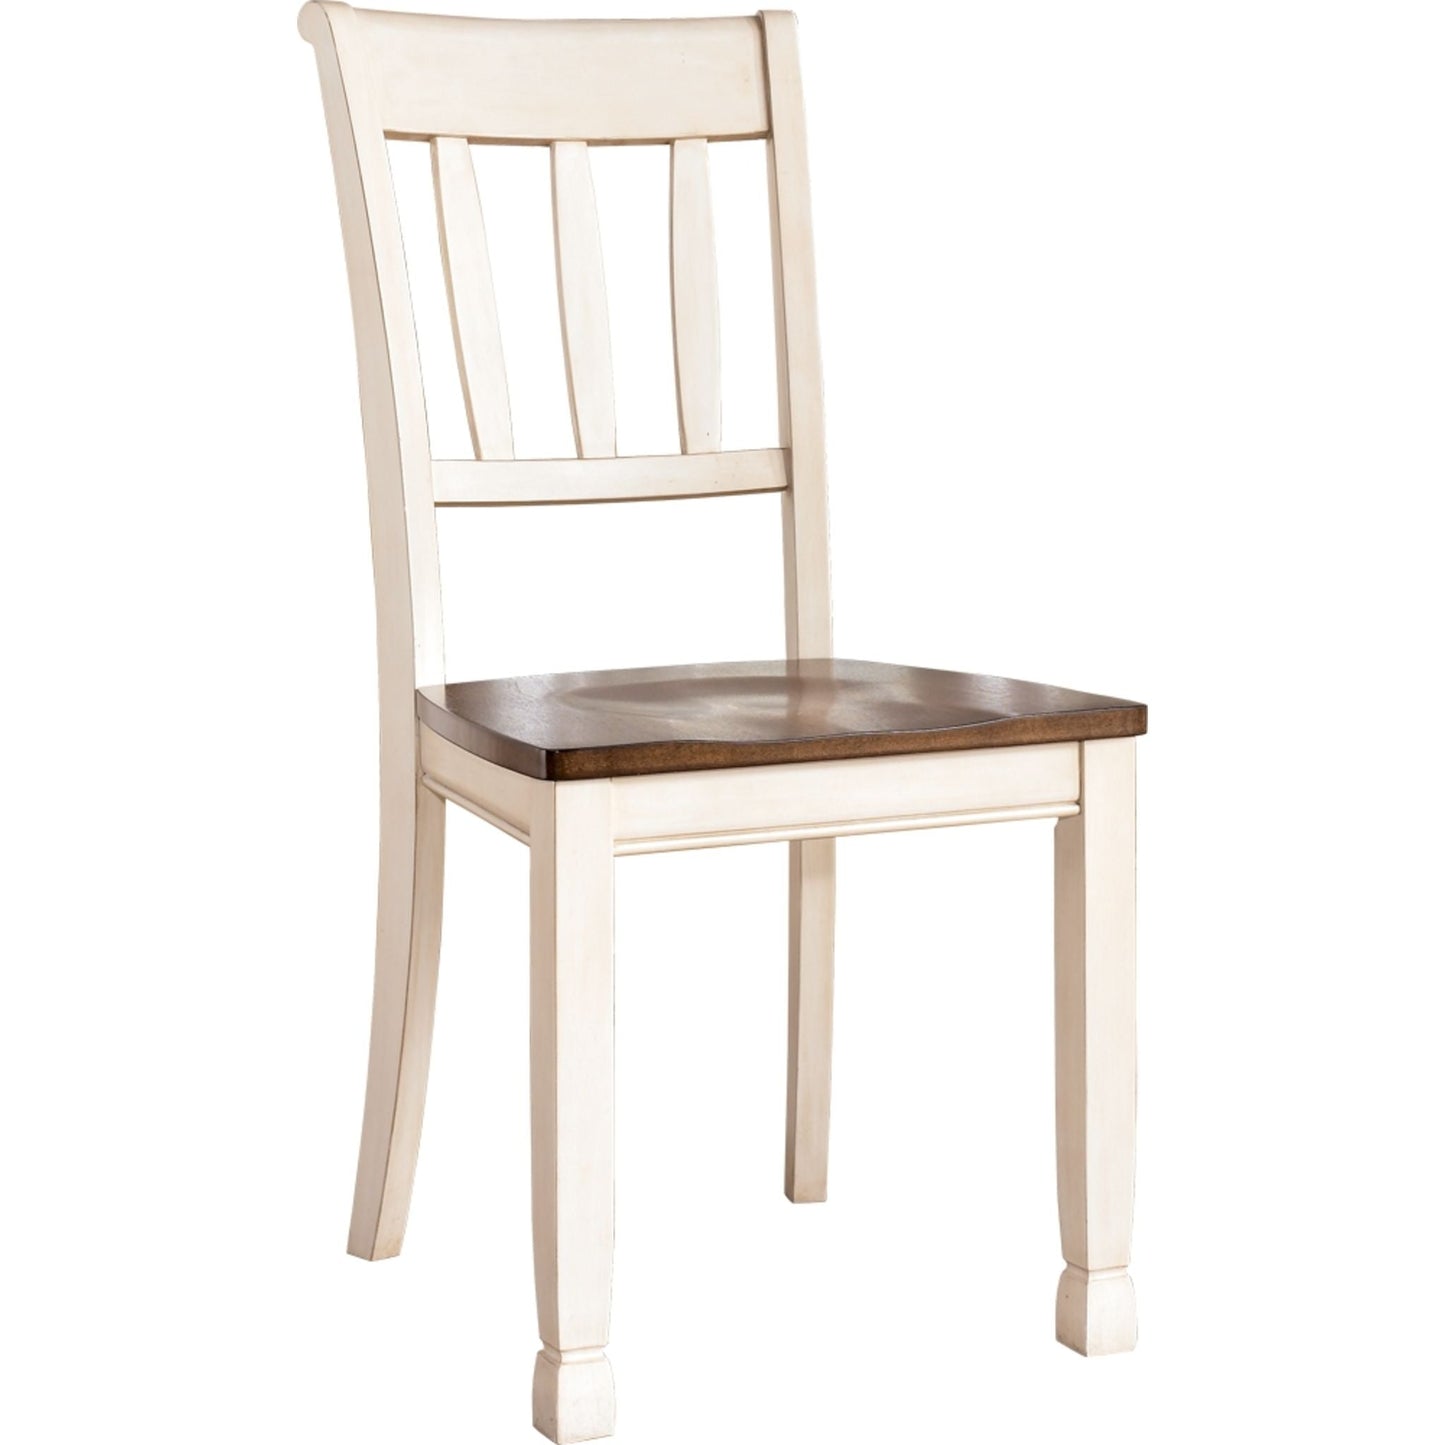 Whitesburg 8 Piece Casual Dining - Brown/Cottage White - (PKG002056)